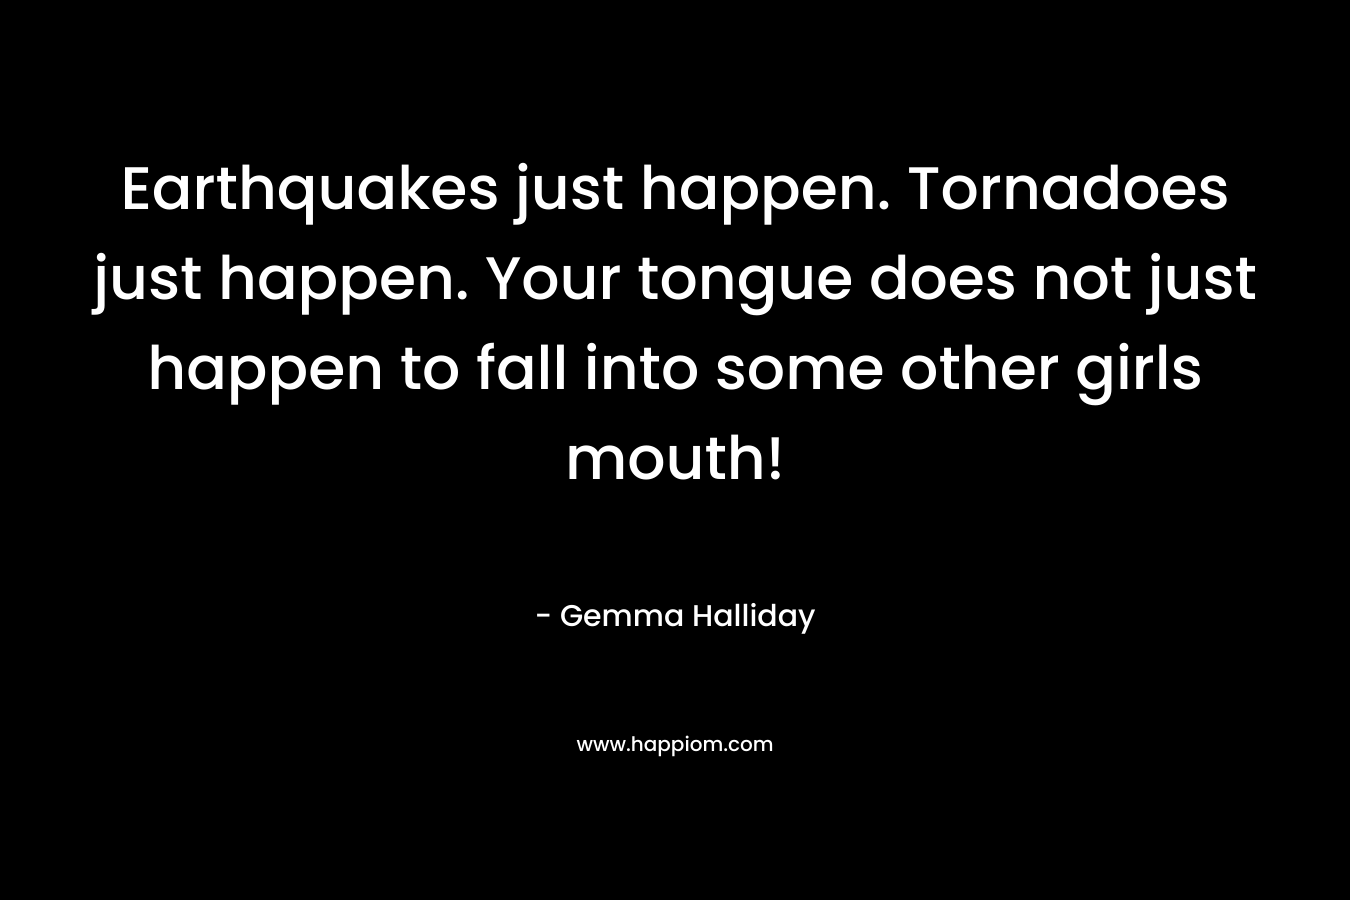 Earthquakes just happen. Tornadoes just happen. Your tongue does not just happen to fall into some other girls mouth! – Gemma Halliday